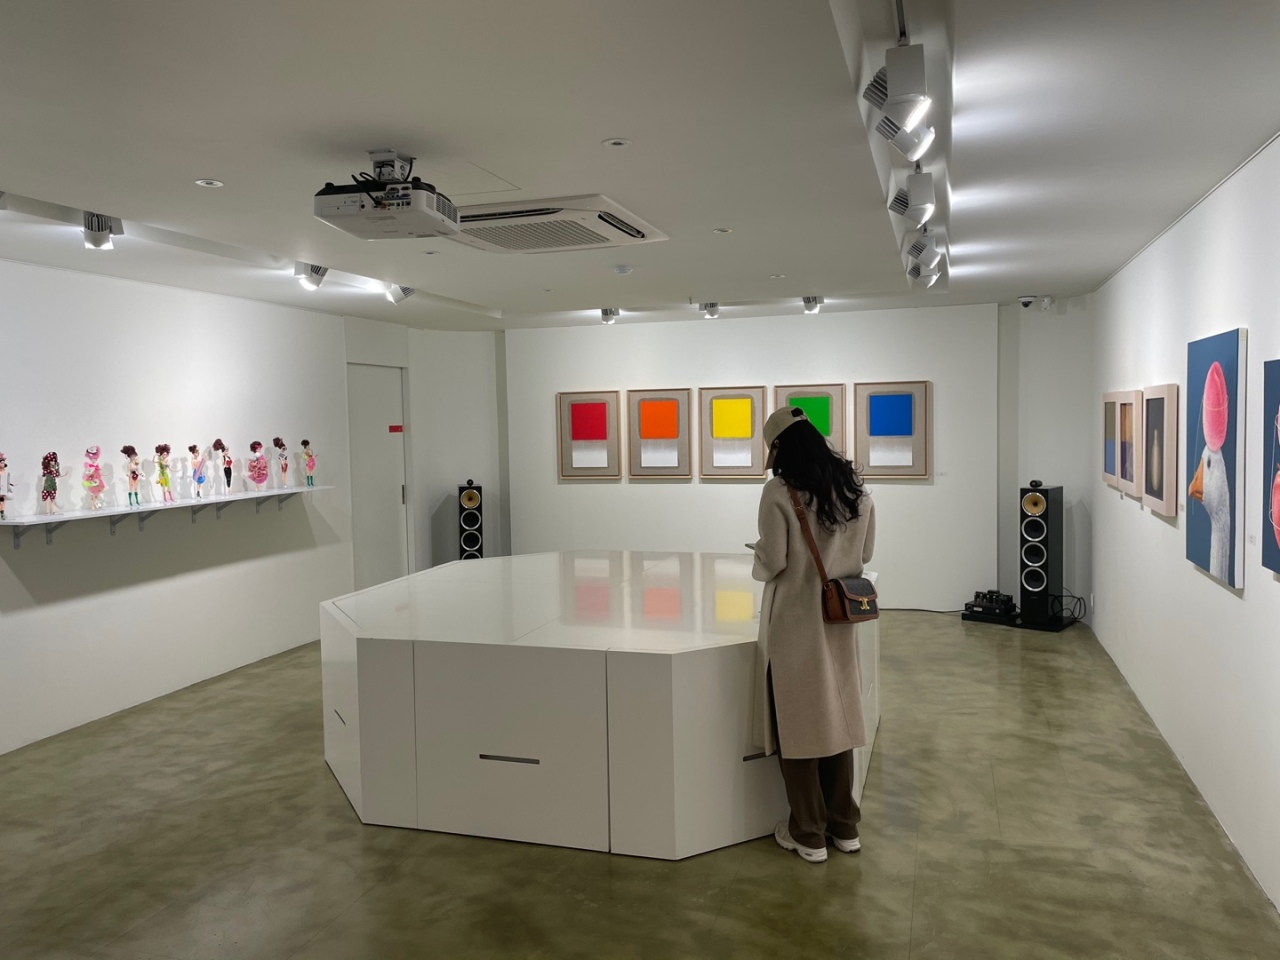 A special exhibition for Ukrainian refugees, “Art in Faith,” is taking place at Hori Artspace and AIF Lounge in Cheongdam-dong, Seoul. (Park Ga-young/The Korea Herald)